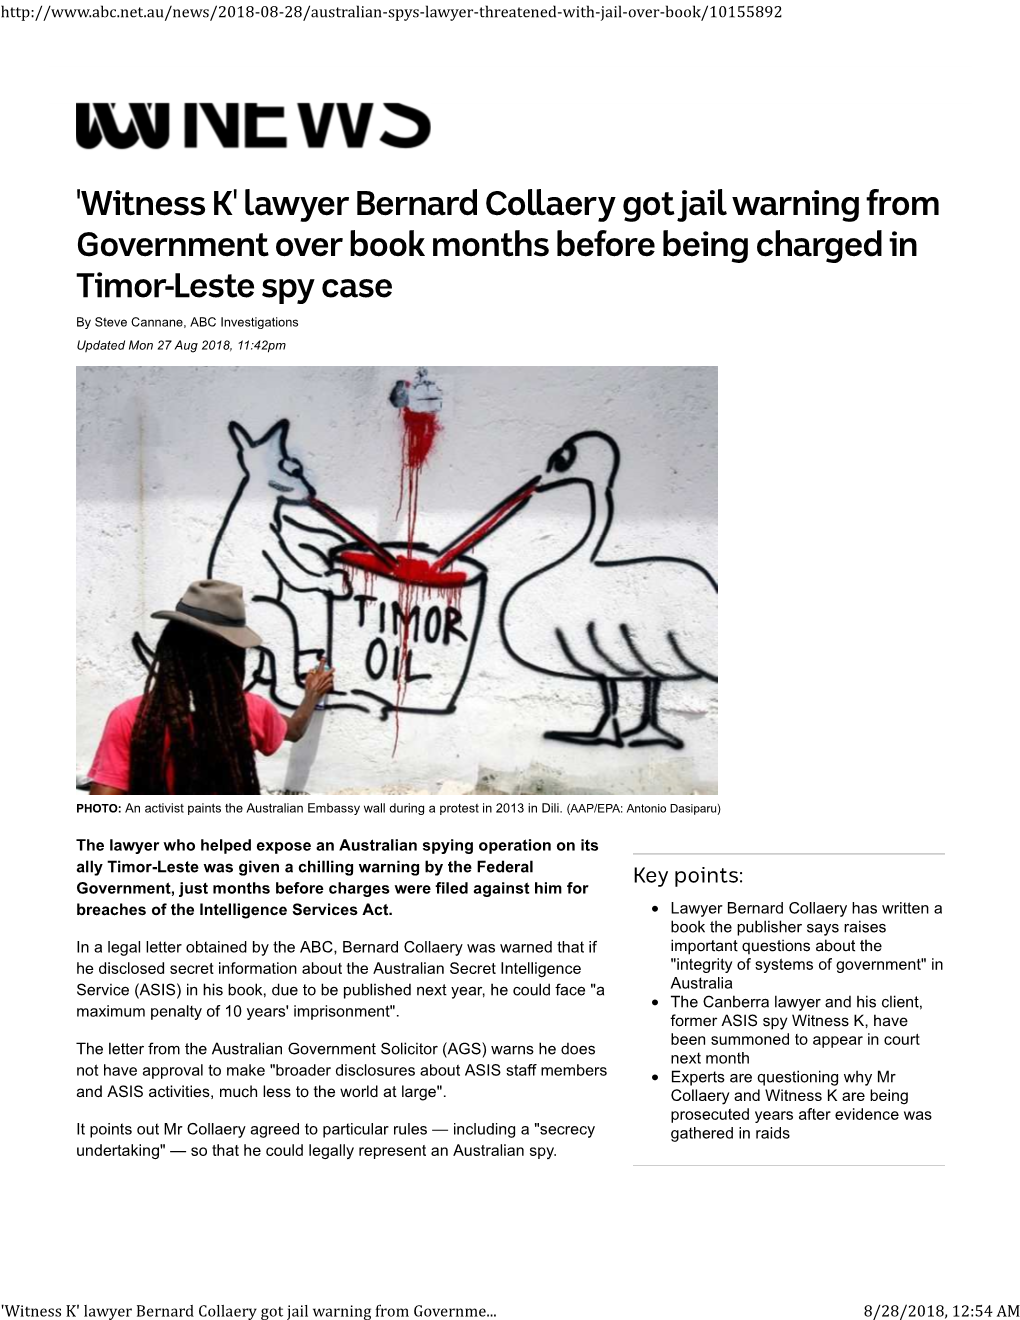 'Witness K' Lawyer Bernard Collaery Got Jail Warning from Government